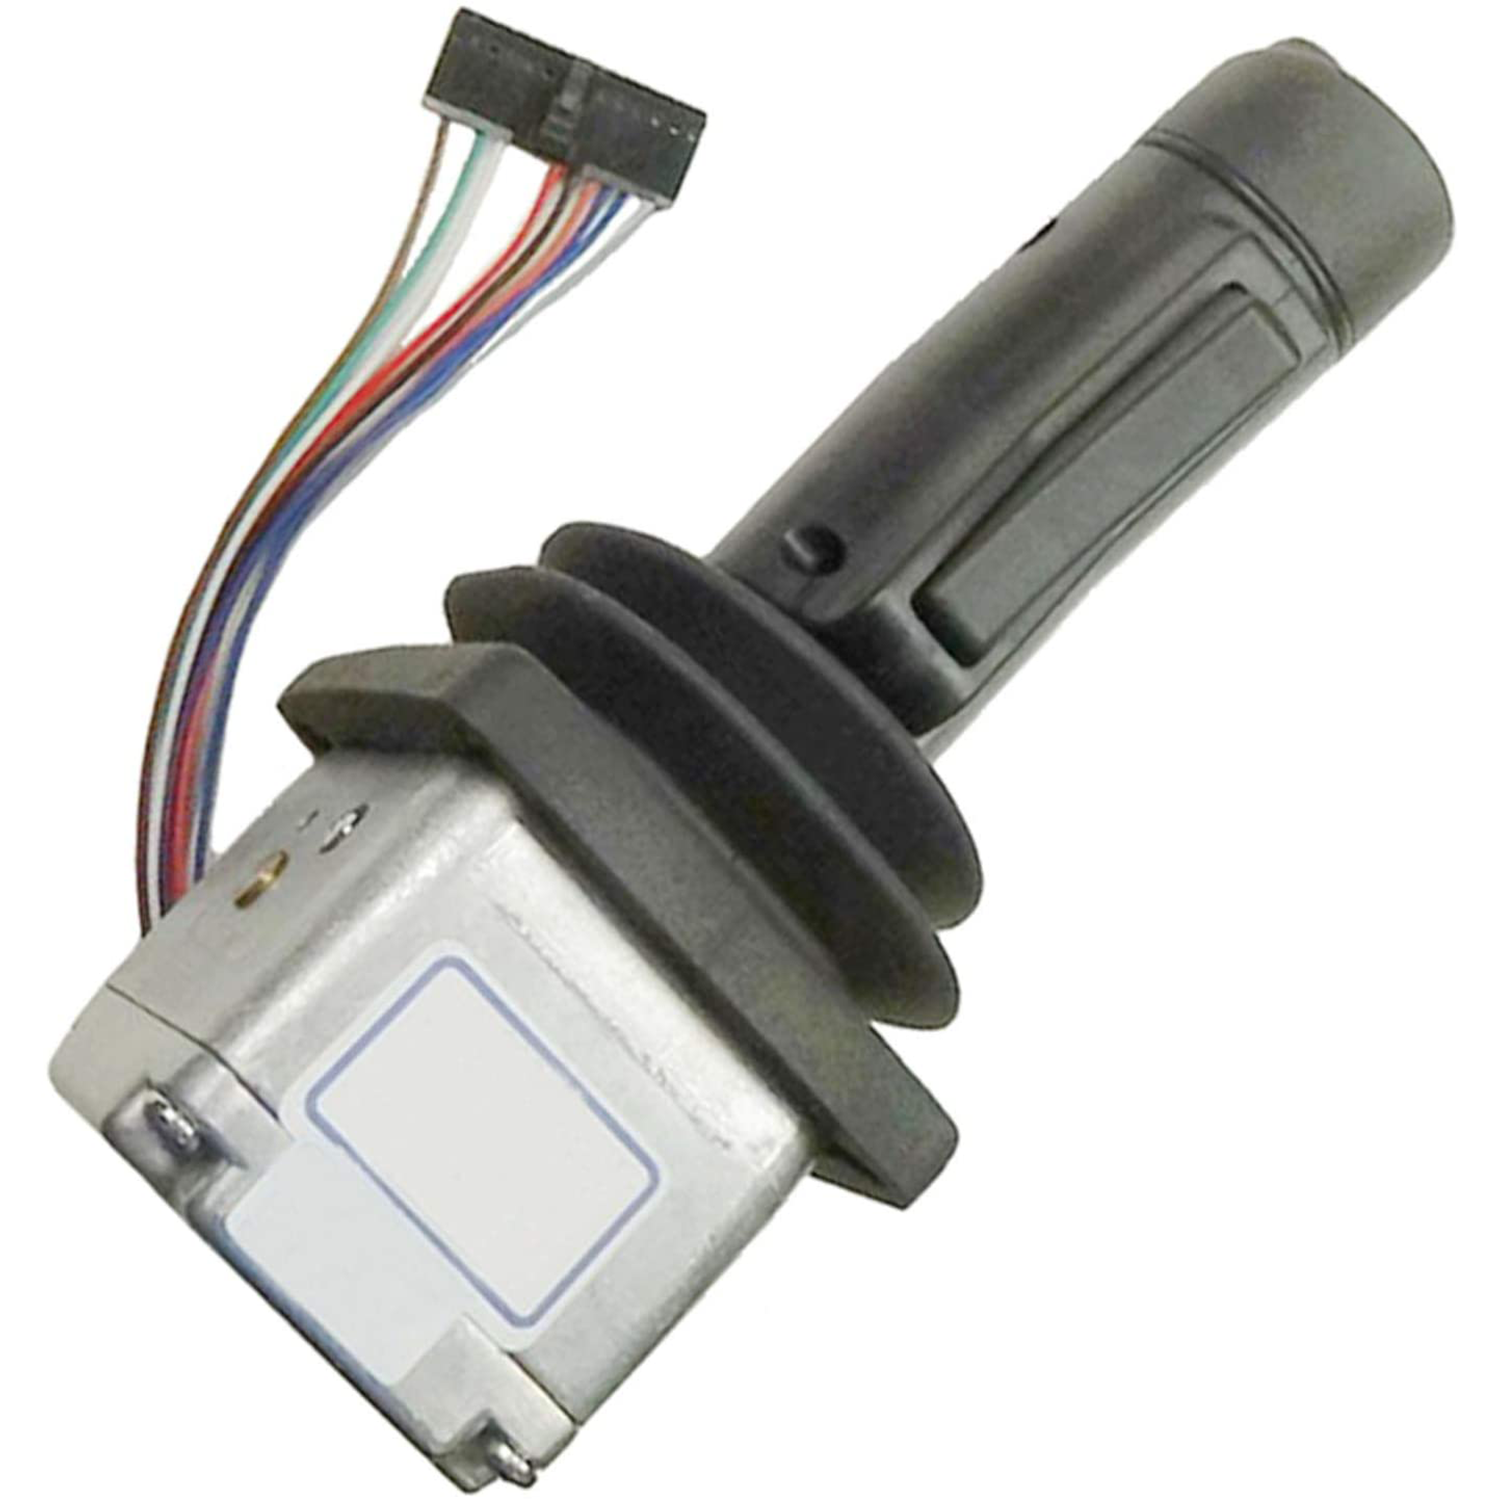 9 Wires Single Axis Joystick Controller 78903 78903H 78903GT Fit for Genie GS30 GS32 GS46 GS68DC Scissor Lift w/ 1 Year Warranty - KUDUPARTS